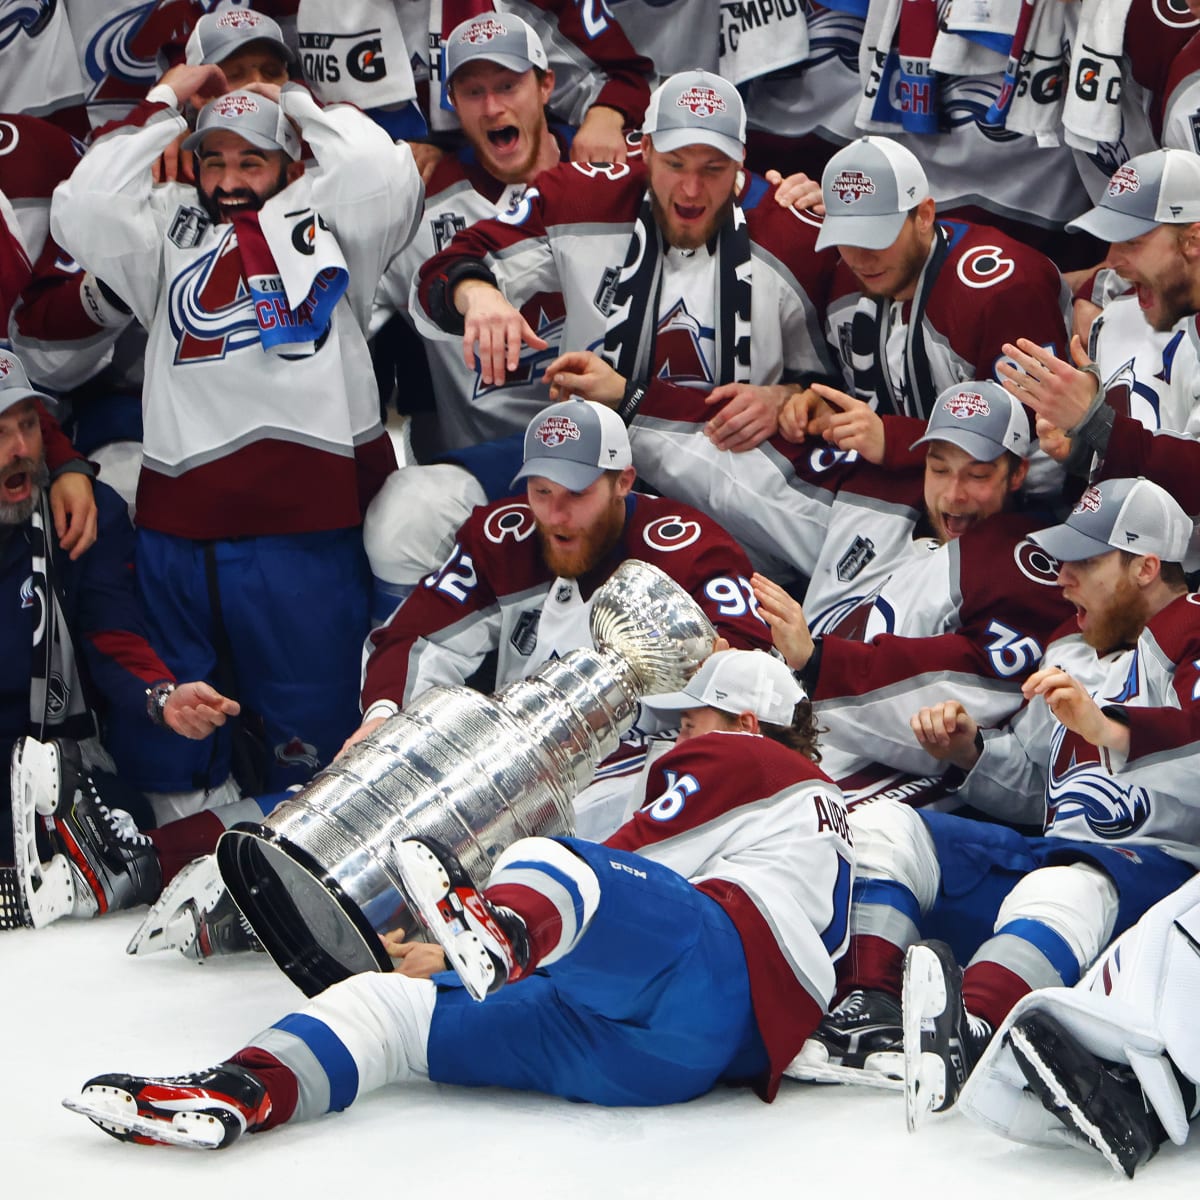 These legendary teams will be removed from the Stanley Cup to make way for  the Washington Capitals